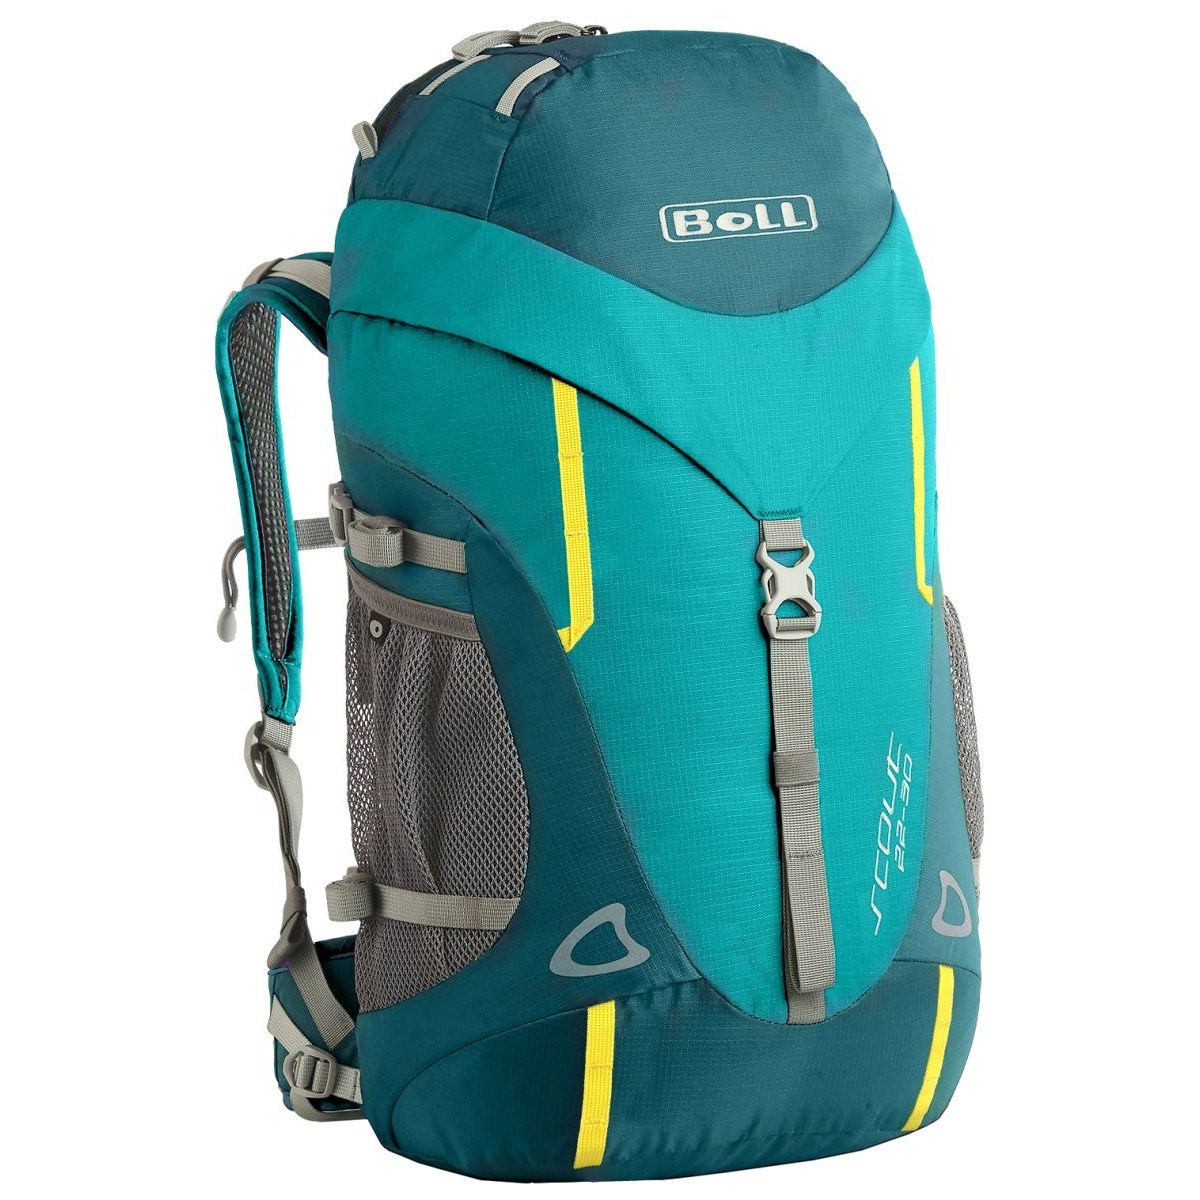 Batoh Boll Scout 22-30 turquoise Boll 10024757 L-11